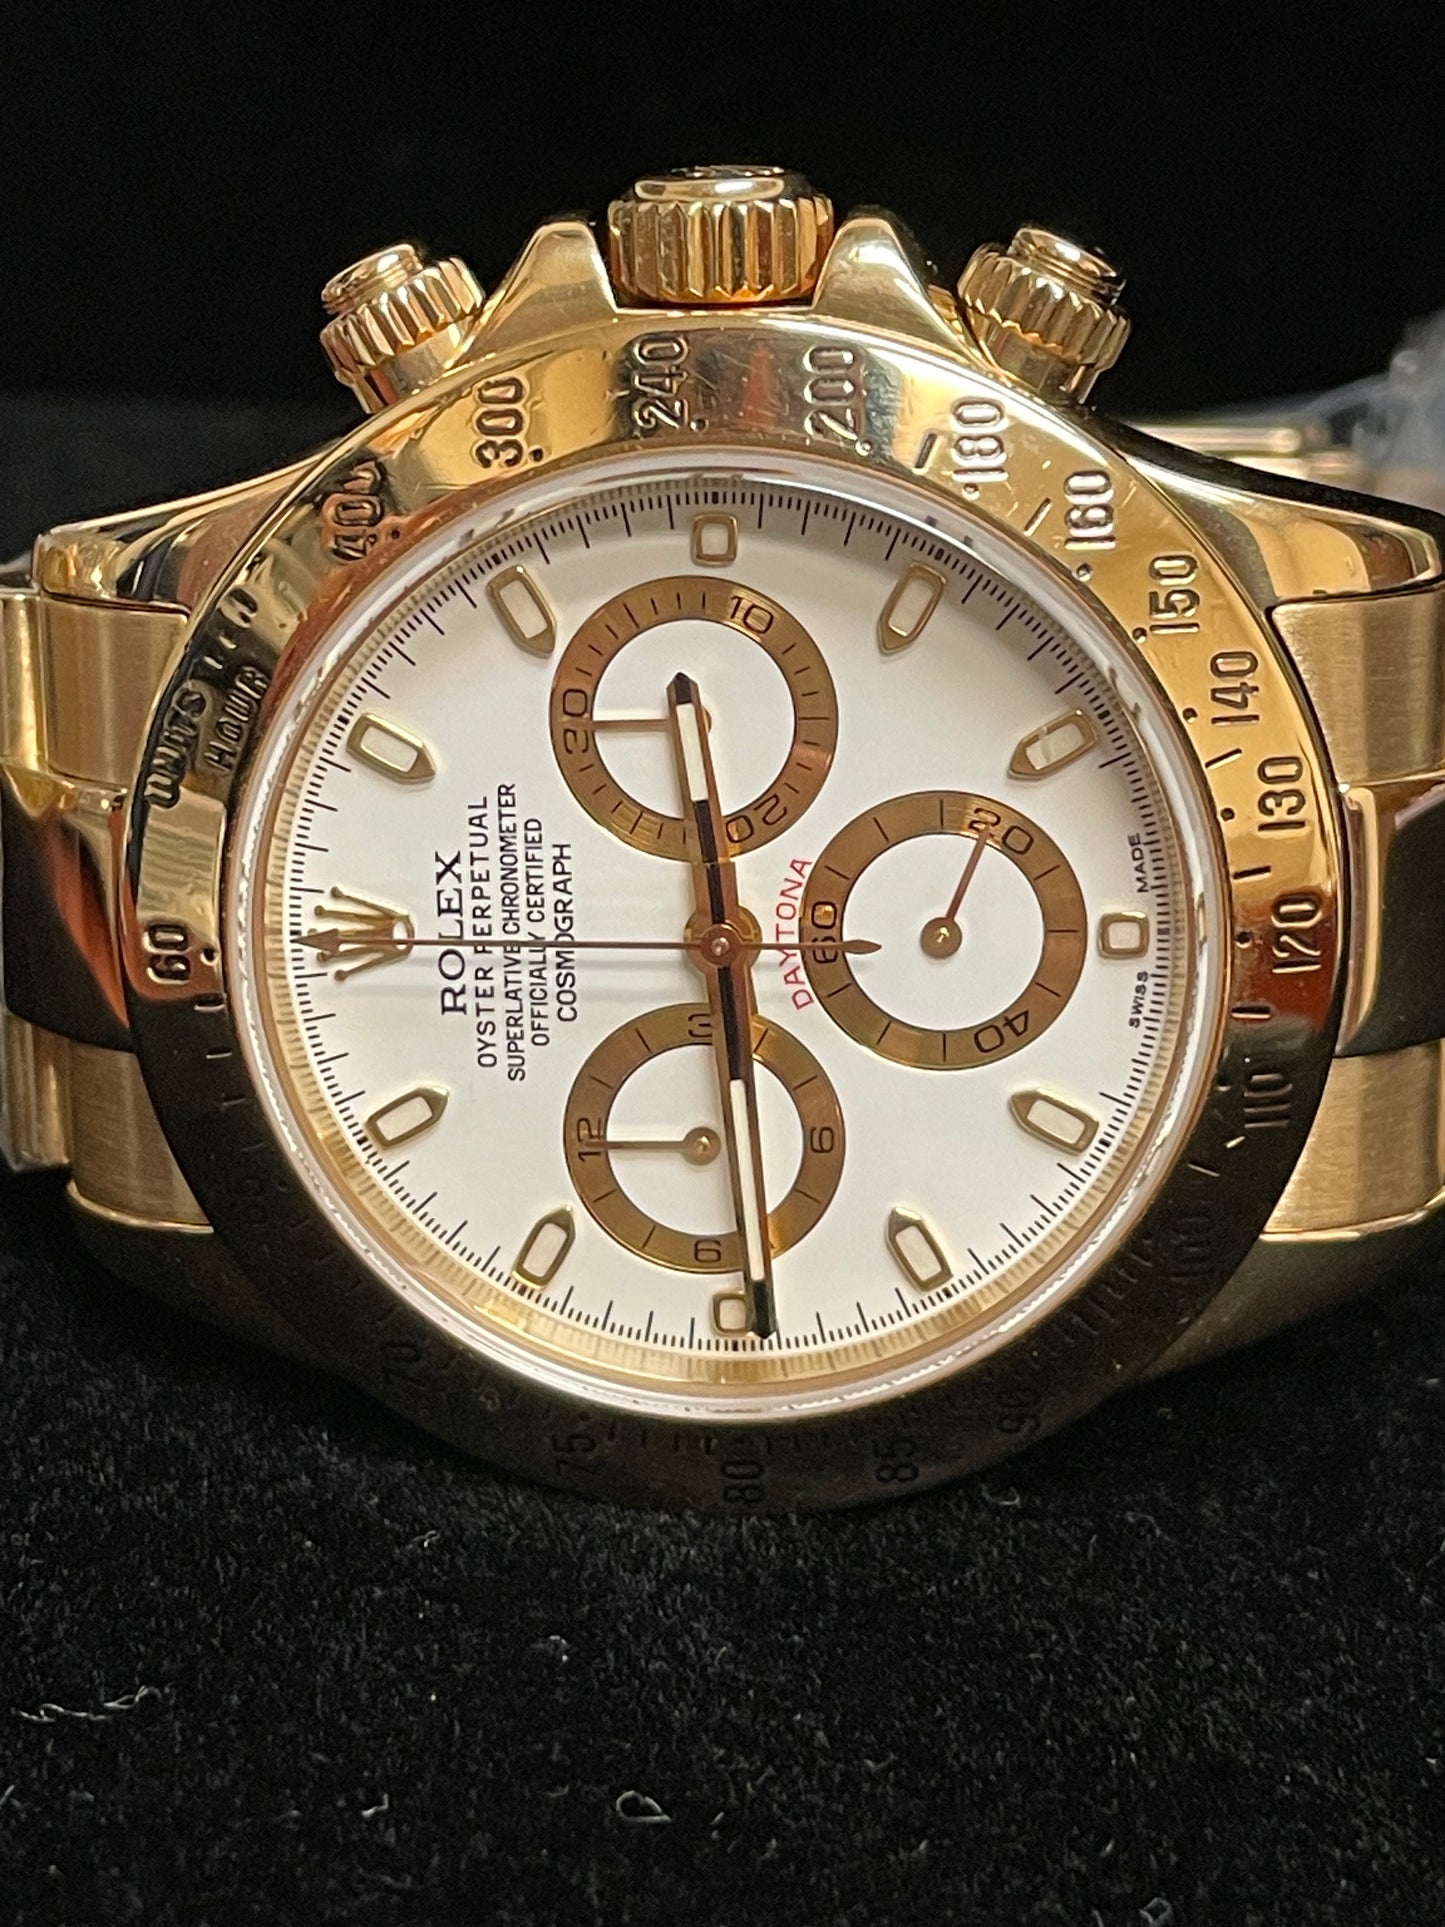 2002 Rolex Daytona 116528 White Dial 18kt Yellow Gold Oyster No Papers 40mm